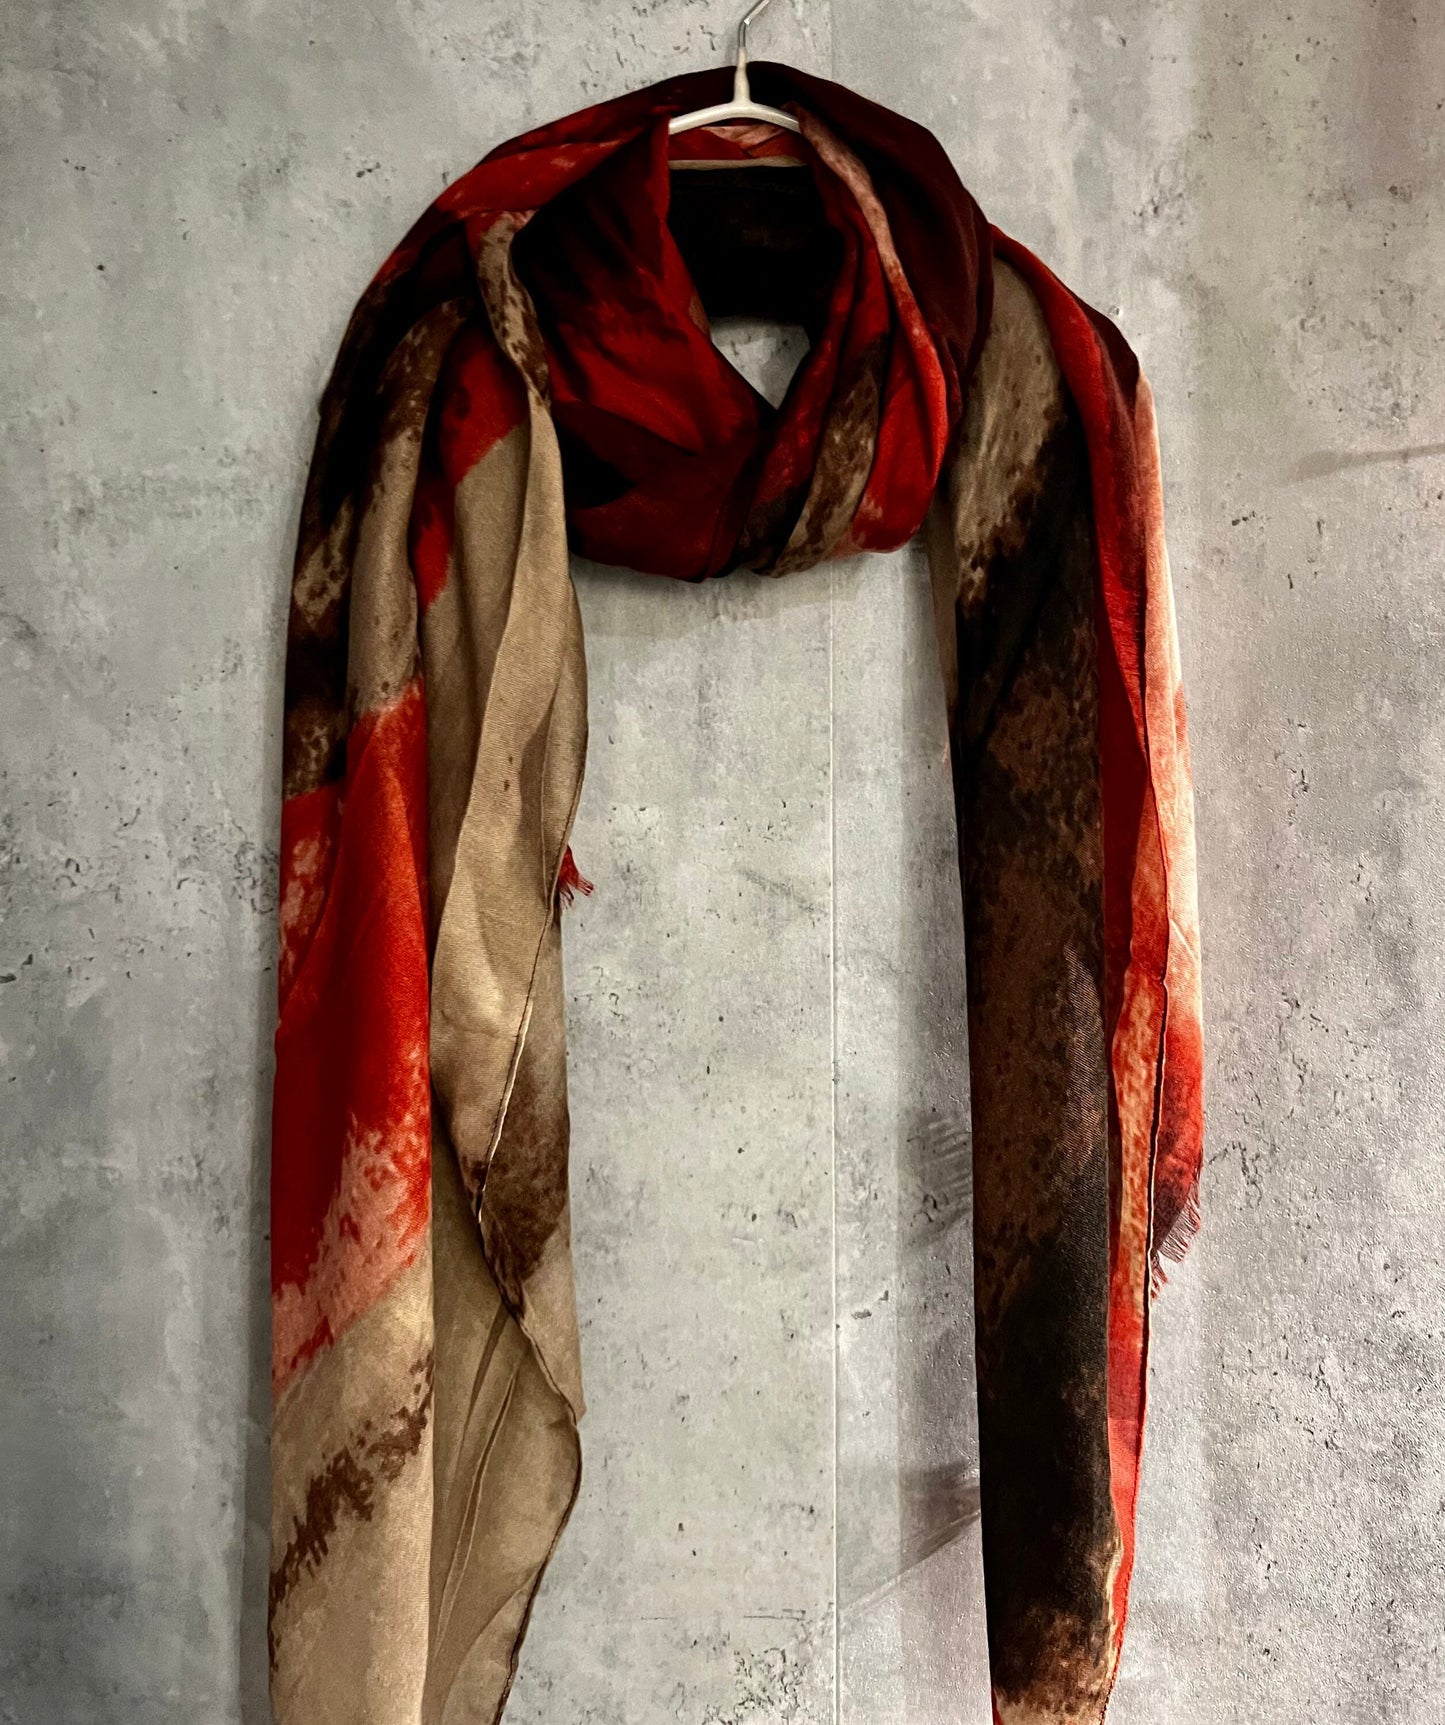 Brushstrokes Pattern Red Beige Cotton Scarf/Summer Autumn Winter Scarf/Gifts For Her Birthday Christmas/Scarf Women/UK Seller